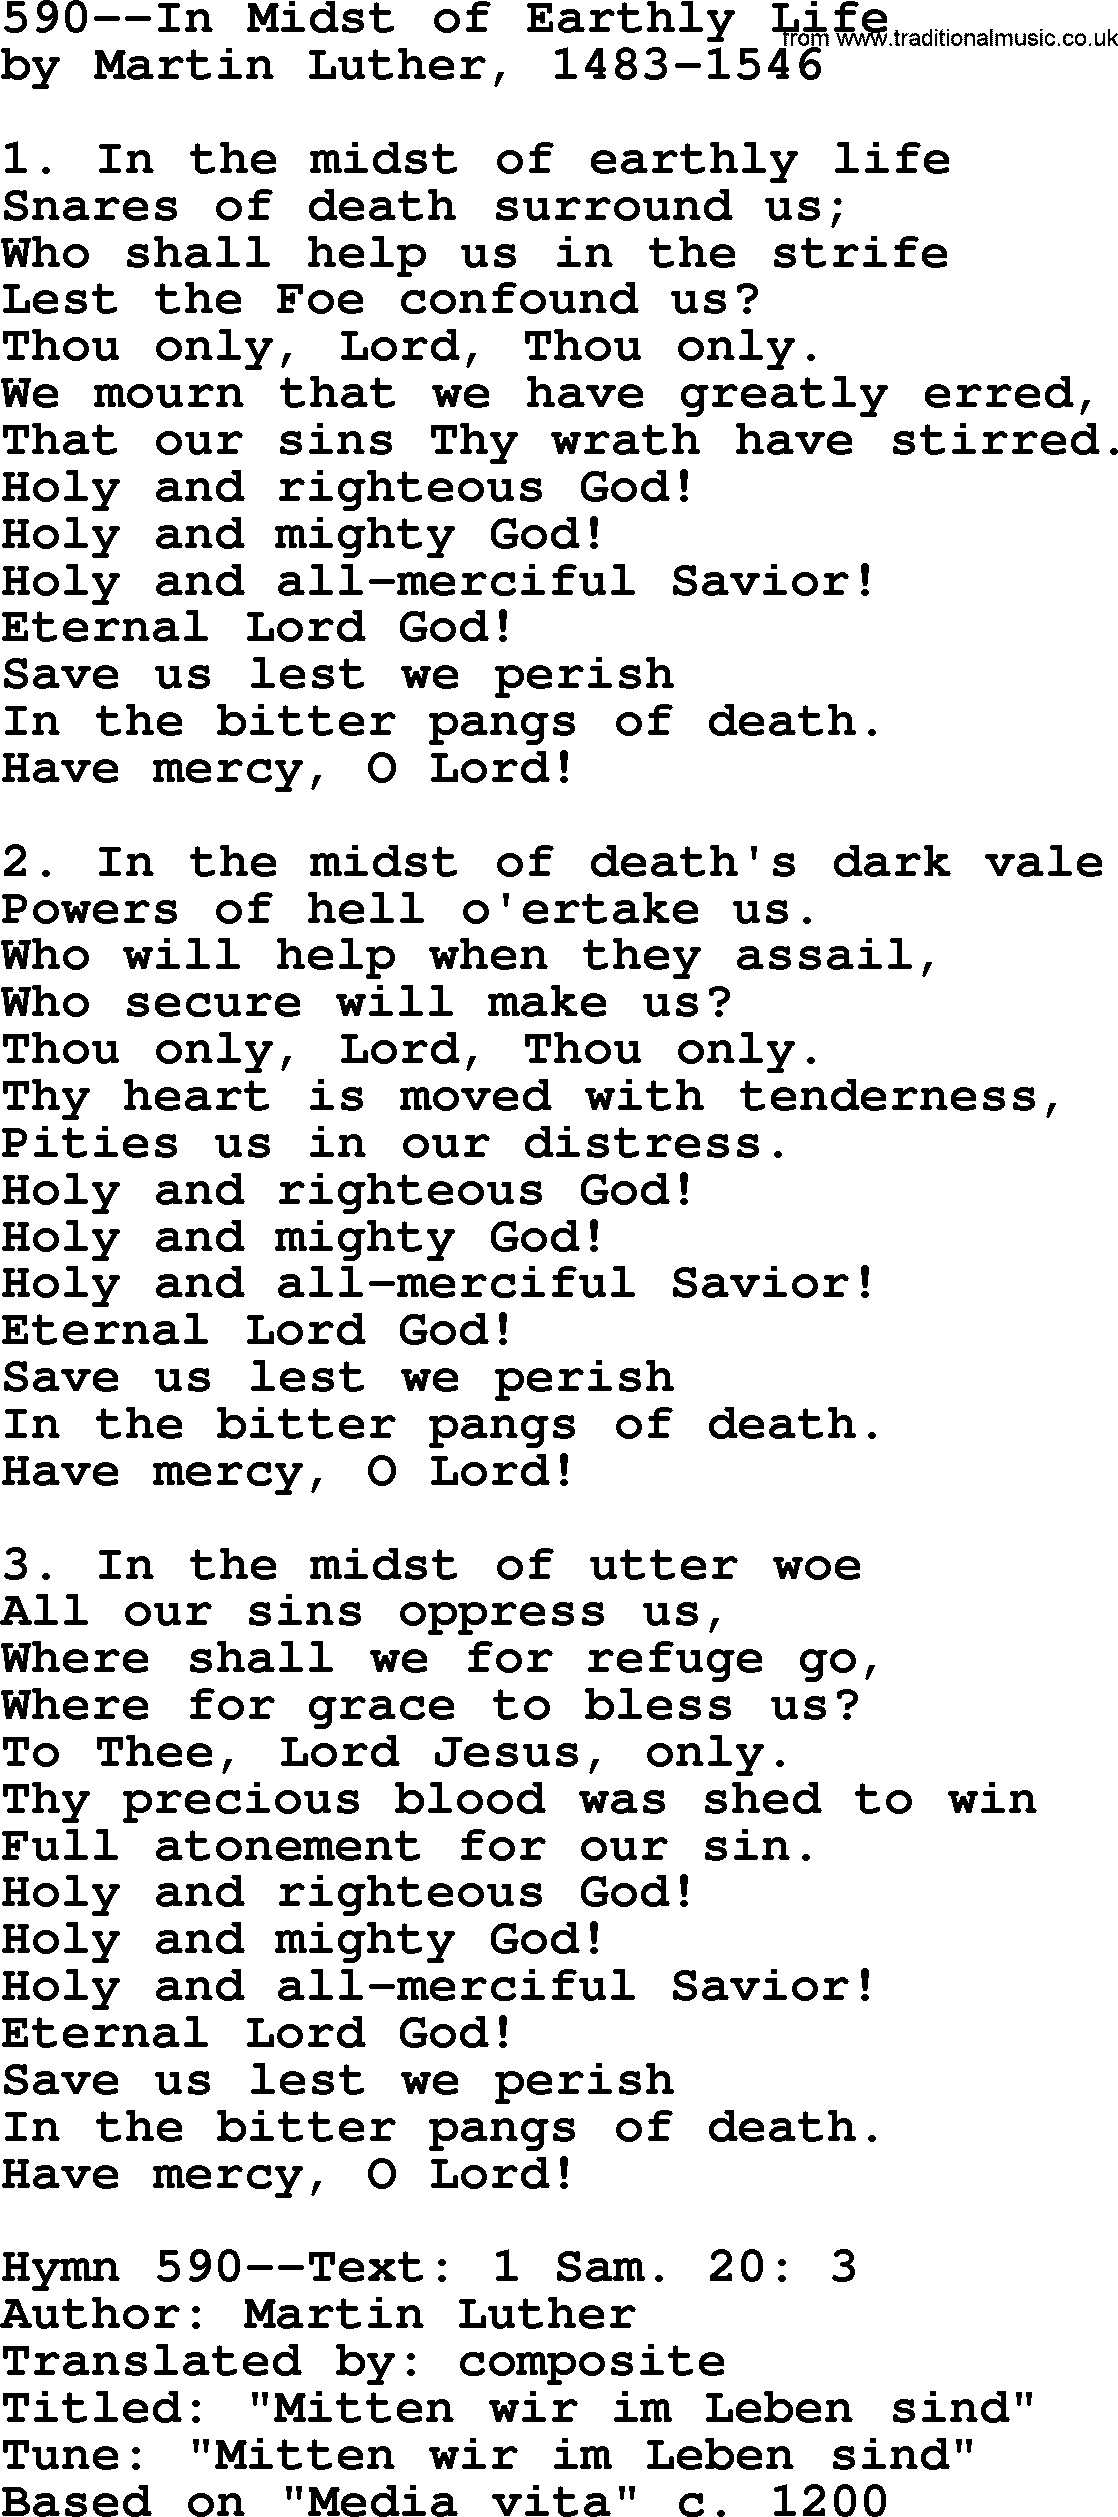 Lutheran Hymn: 590--In Midst of Earthly Life.txt lyrics with PDF